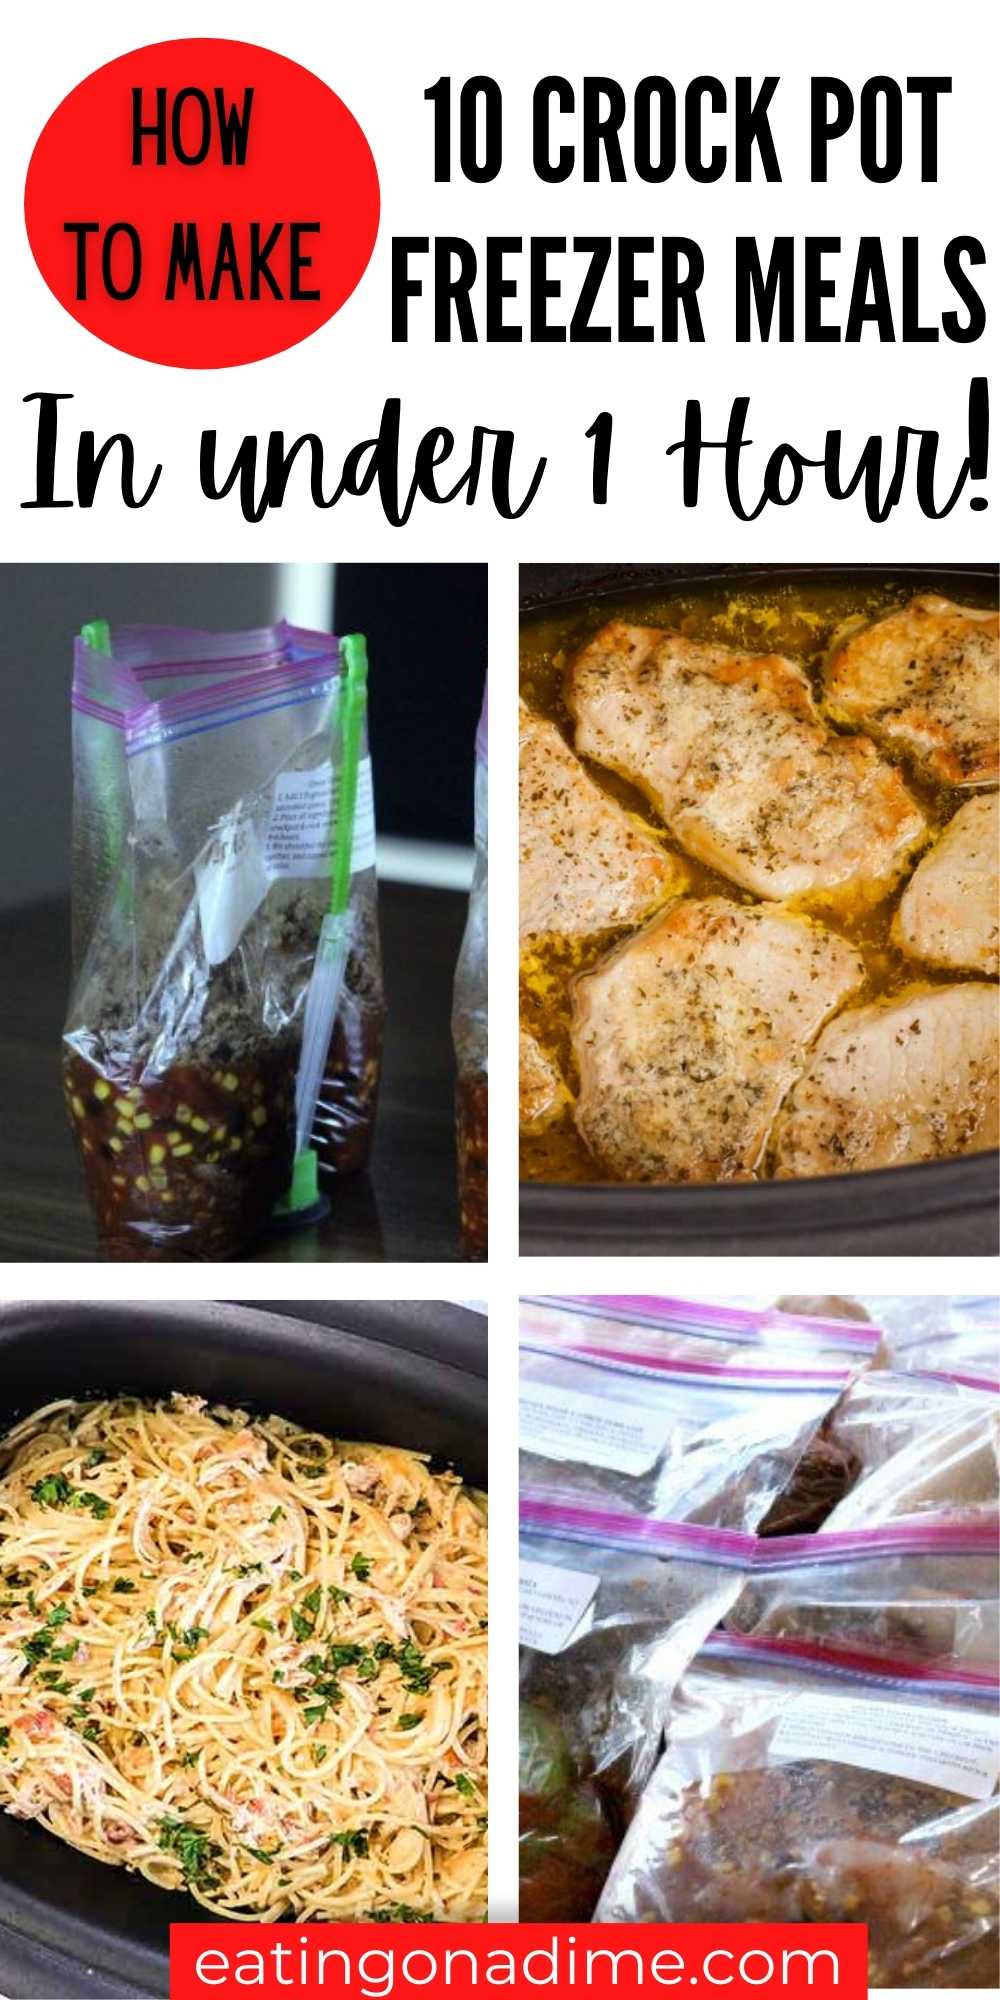 Check out this easy 10 crock pot Make ahead Meals that can easily be made in under 1 hour! These easy Make ahead Meals are easy to make and freeze great. Learn how to make crockpot freezer meals in under 1 hour.  These crock pot freezer meals are easy to make!  #eatingonadime #freezermeals #crockpotrecipes #freezercooking 
